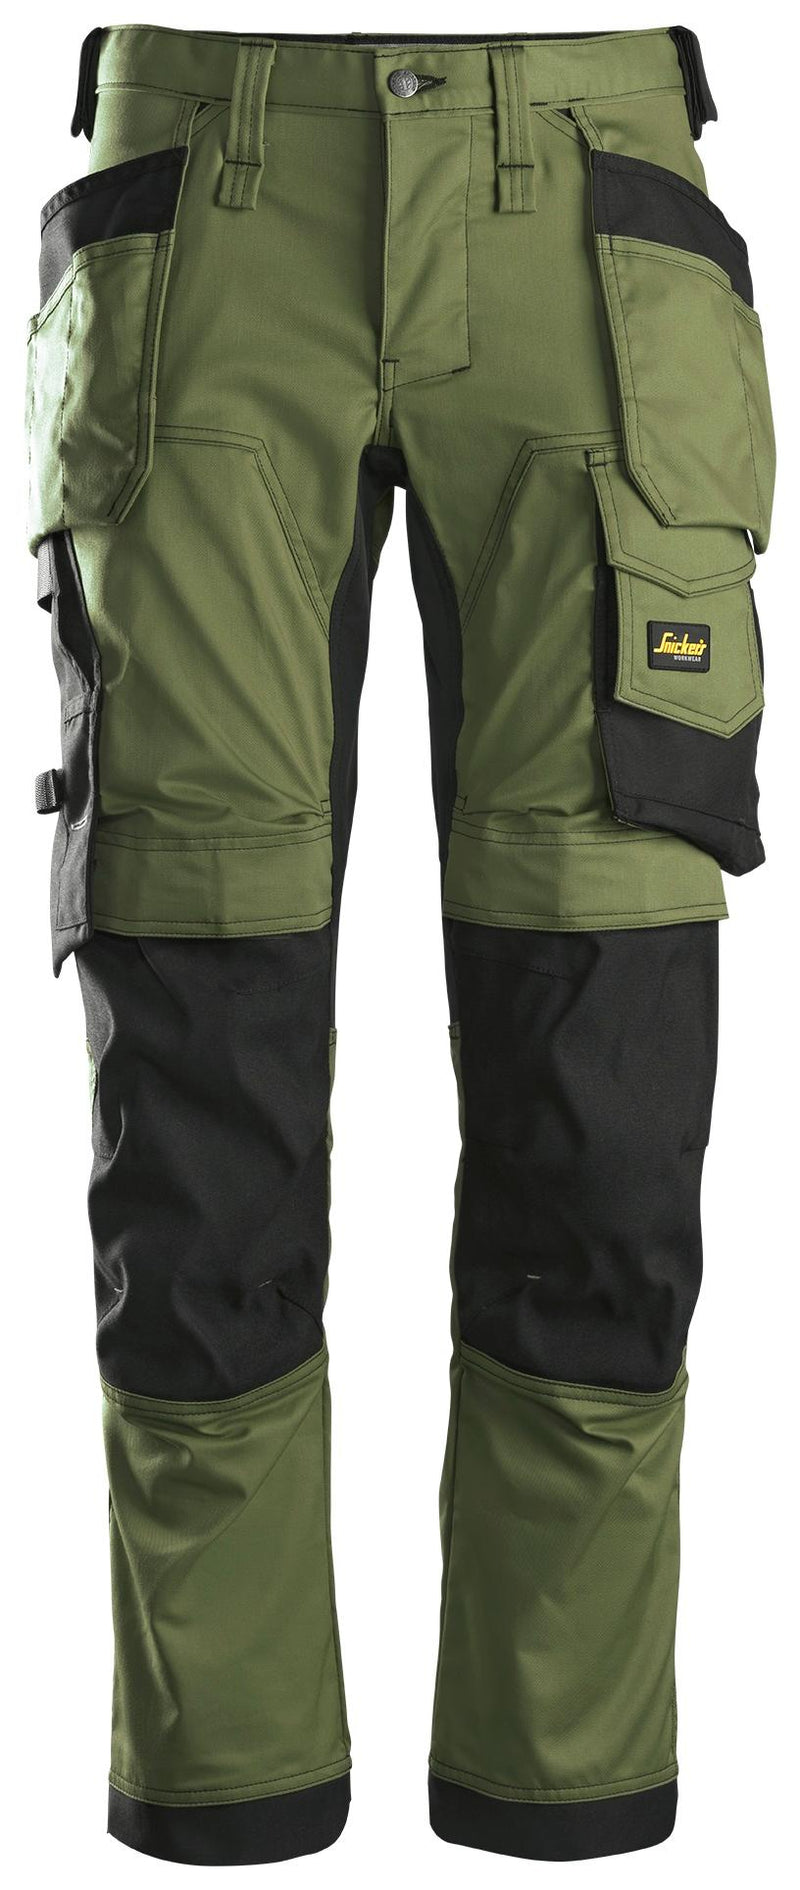 Snickers Workwear 6241 AllroundWork Stretch Trousers + Holster Pockets - Khaki Green/Black